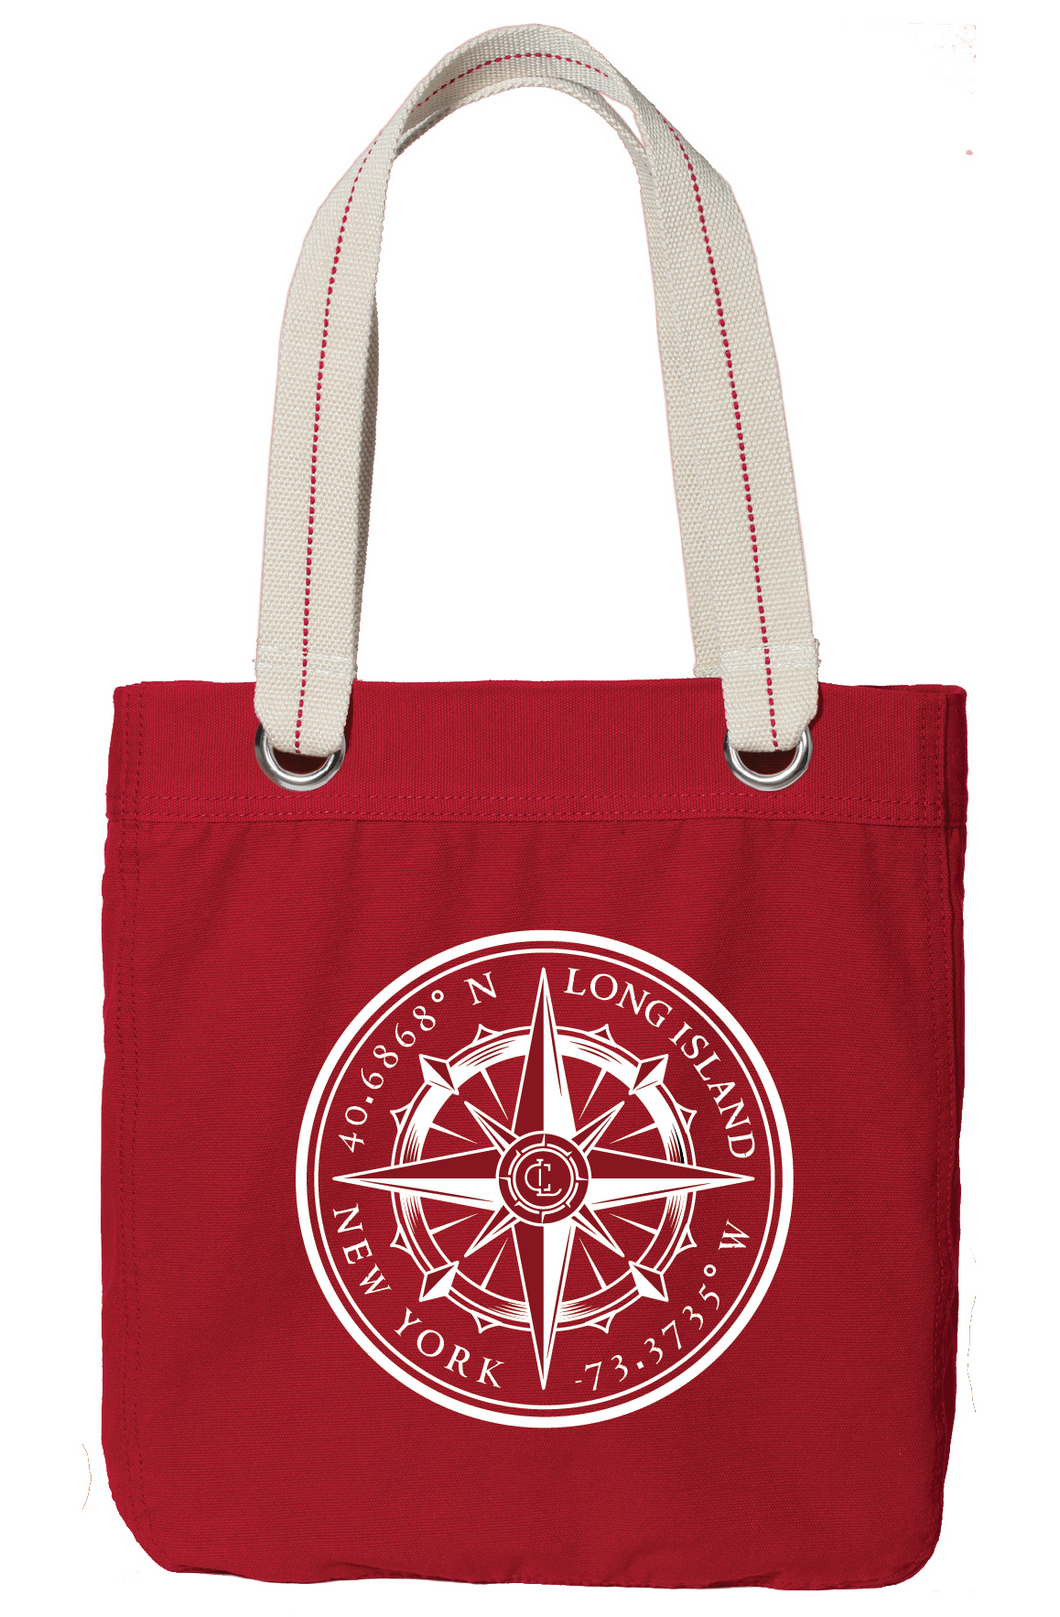 Sale: Long Island Compass Tote - Nautical Red